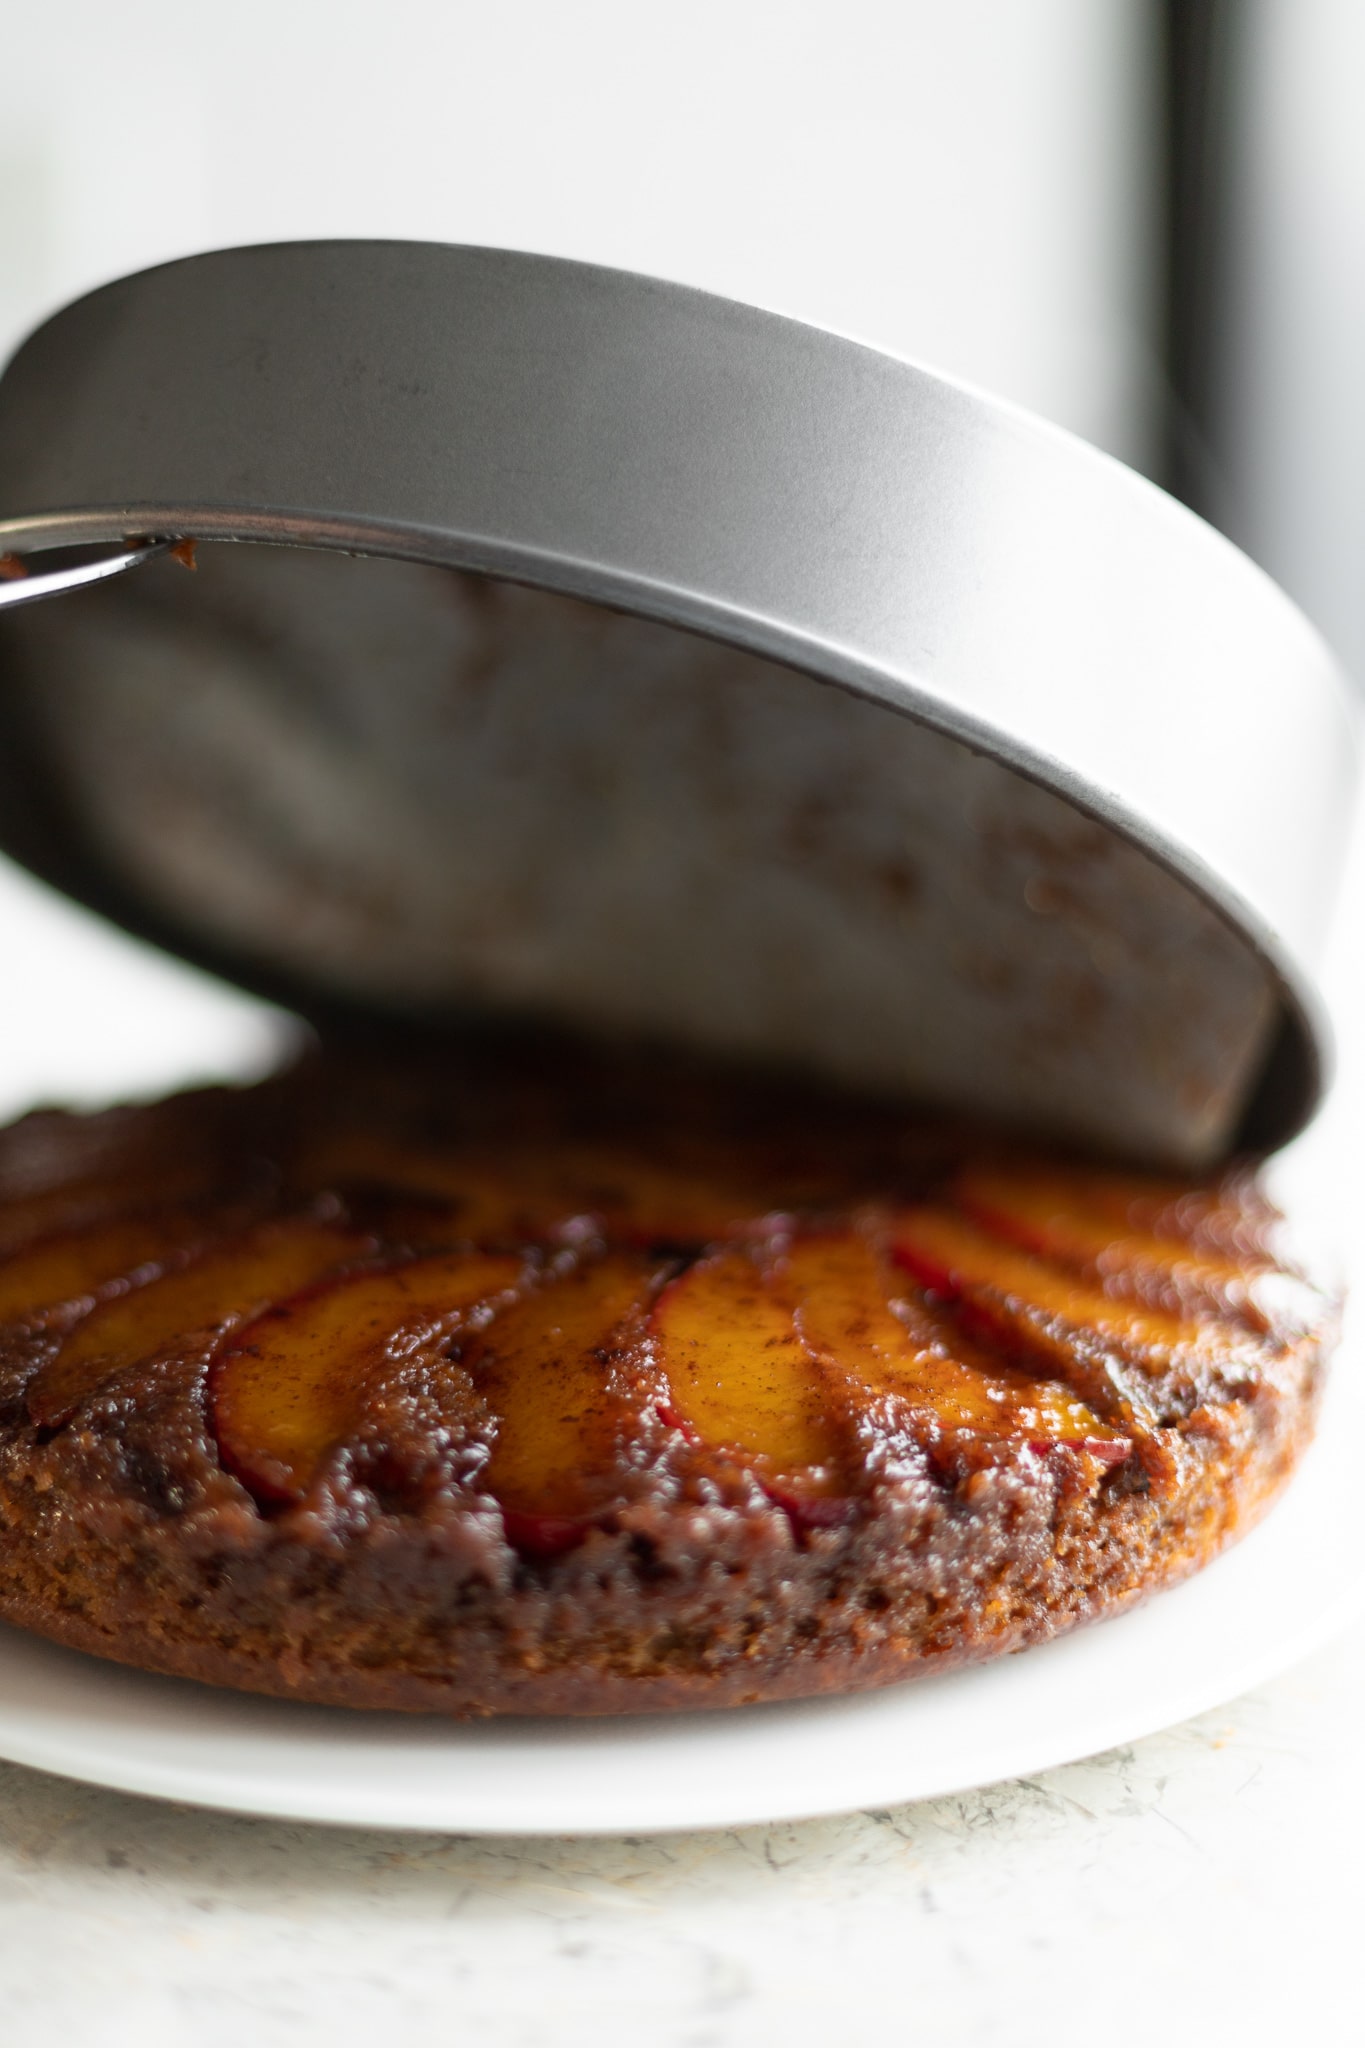 plum upside down cake, flipped over and the pan being removed to reveal the cake underneath